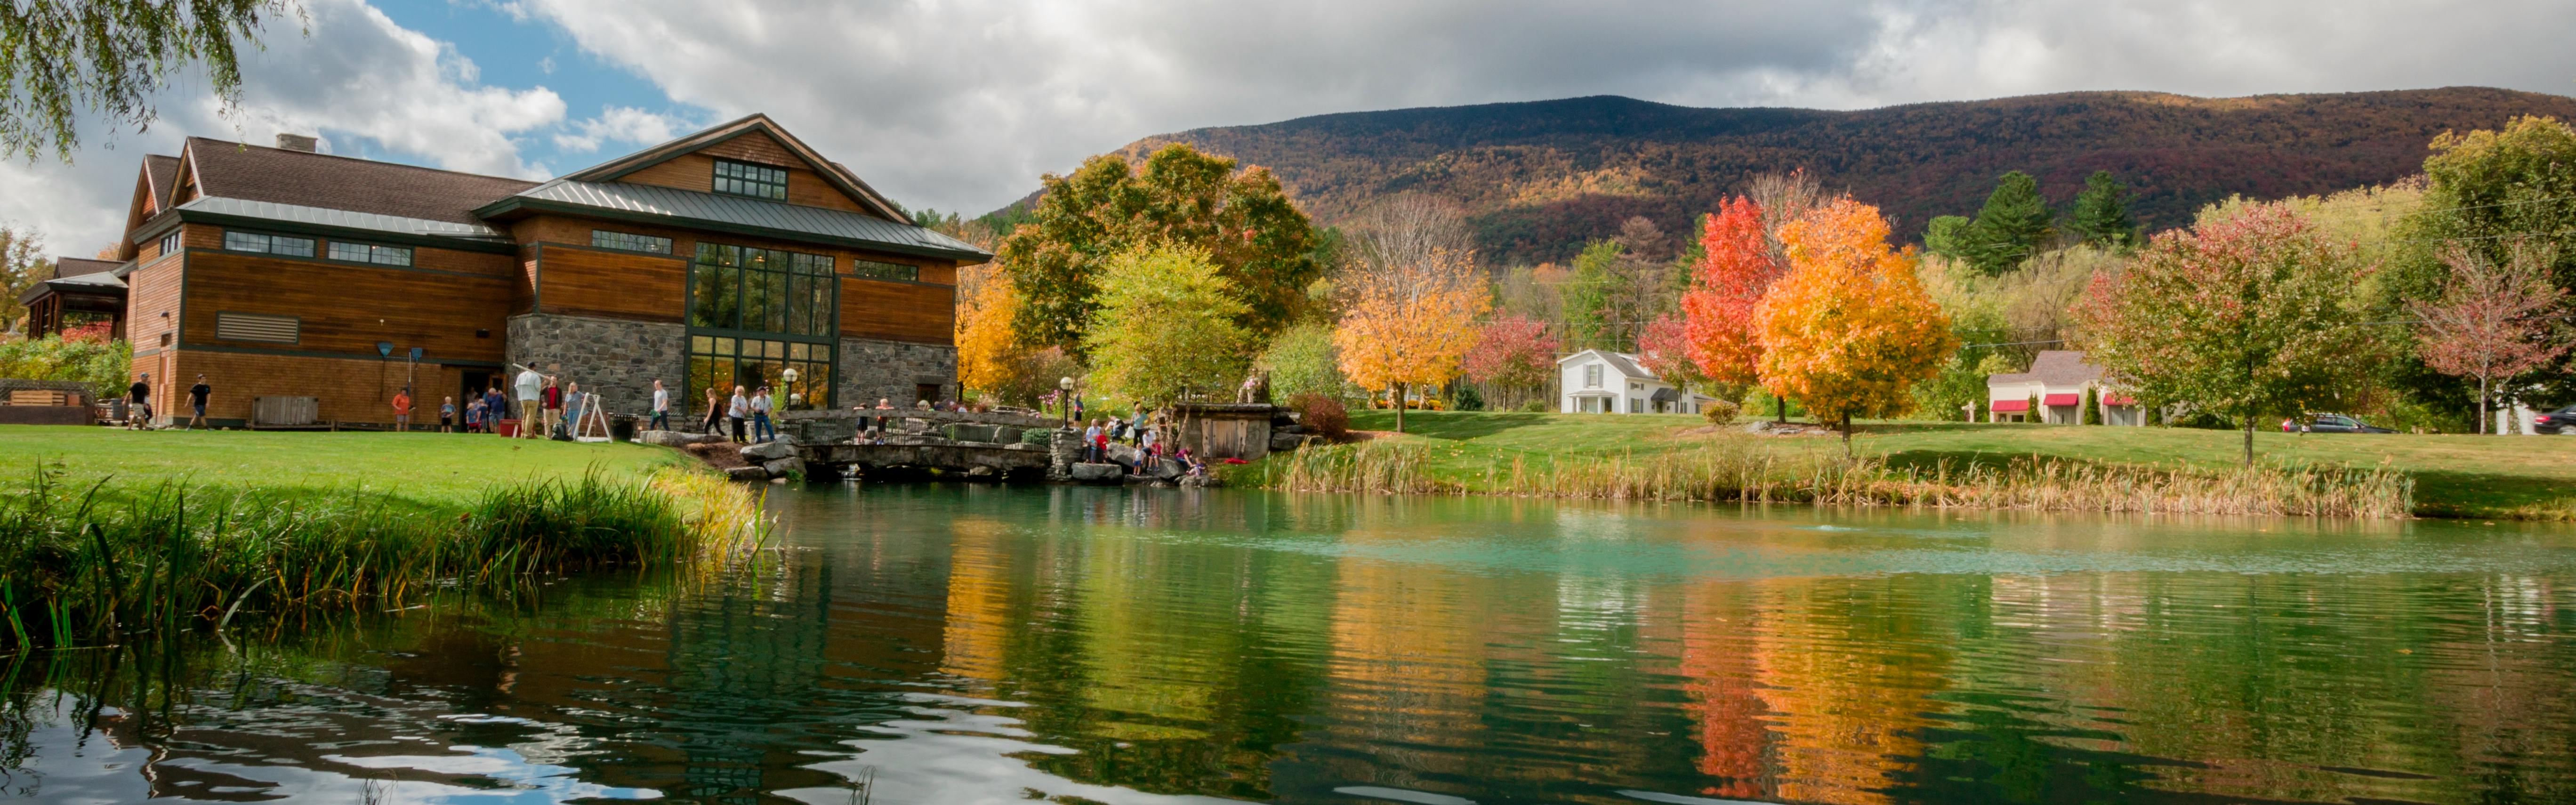 The Orvis store in Manchester on the edge of a lake surrounded by bright red and yellow autumn foliage